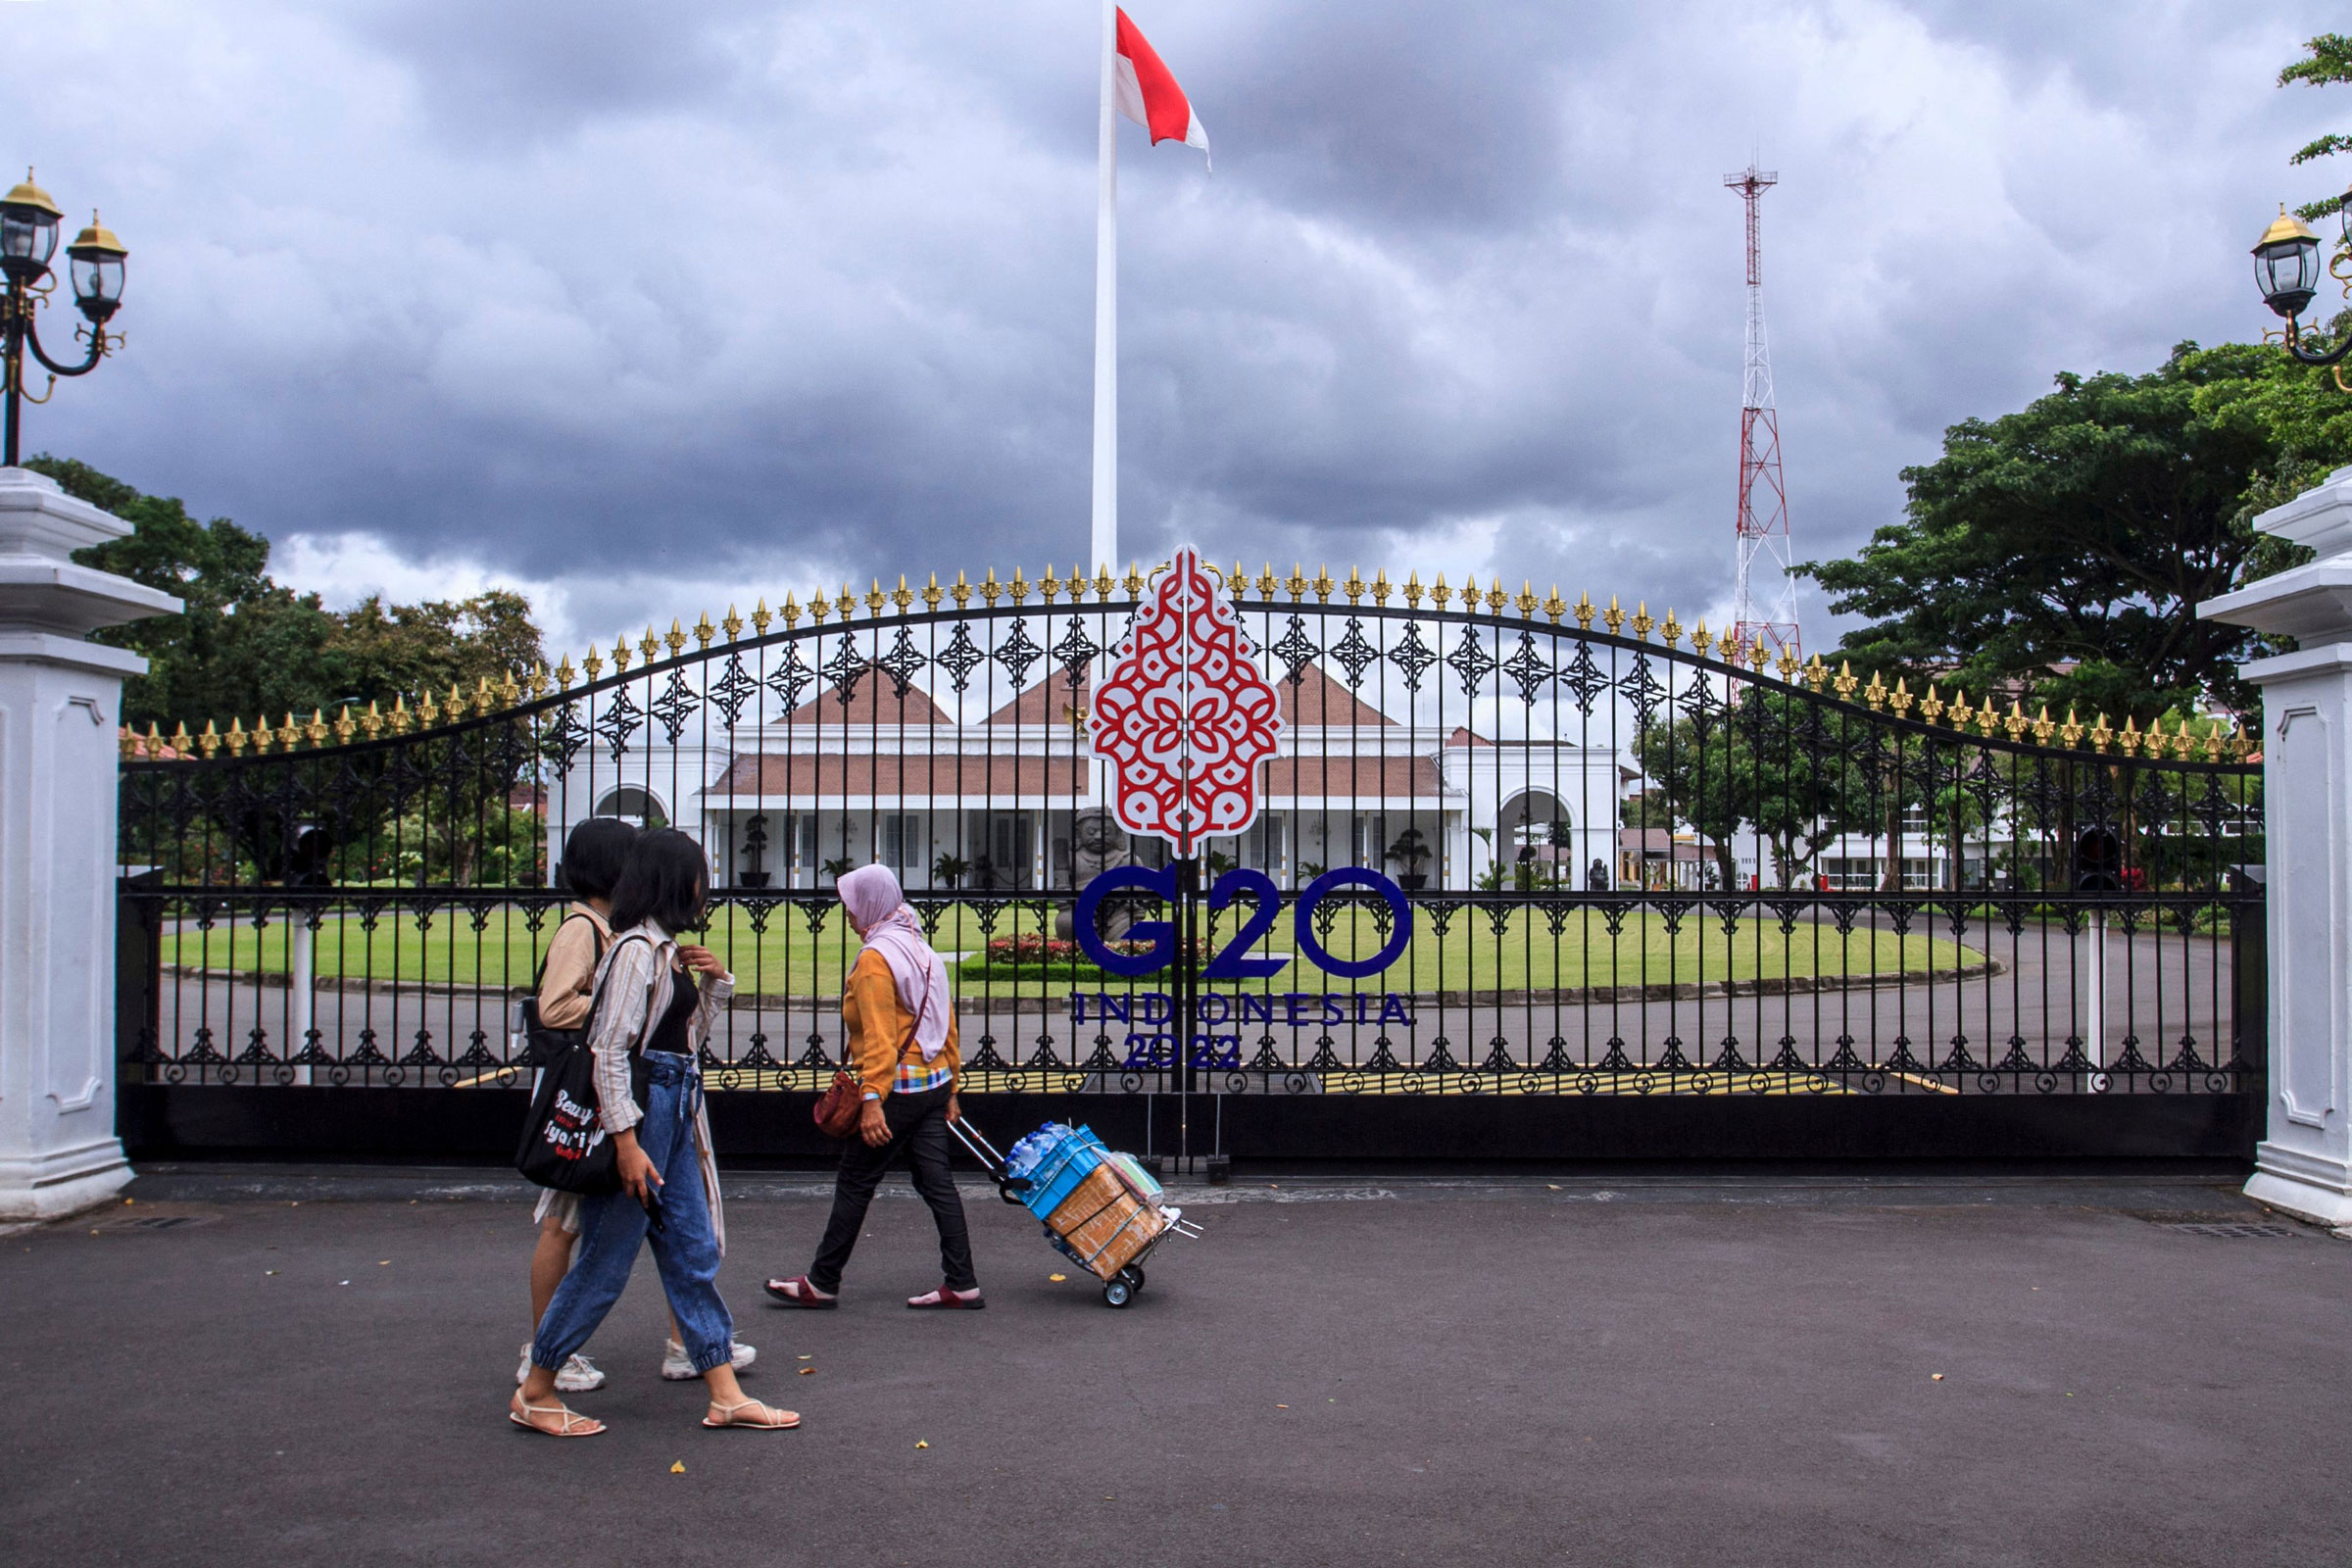 People walk by the main gate of the Kraton, also known as the Palace of Yogyakarta, in Indonesia on Oct. 30, 2022, which has been prepared to welcome the upcoming G20 summit to be held in Bali on Nov. 14-16, 2022. (Devi Rahman—AFP/Getty Images)